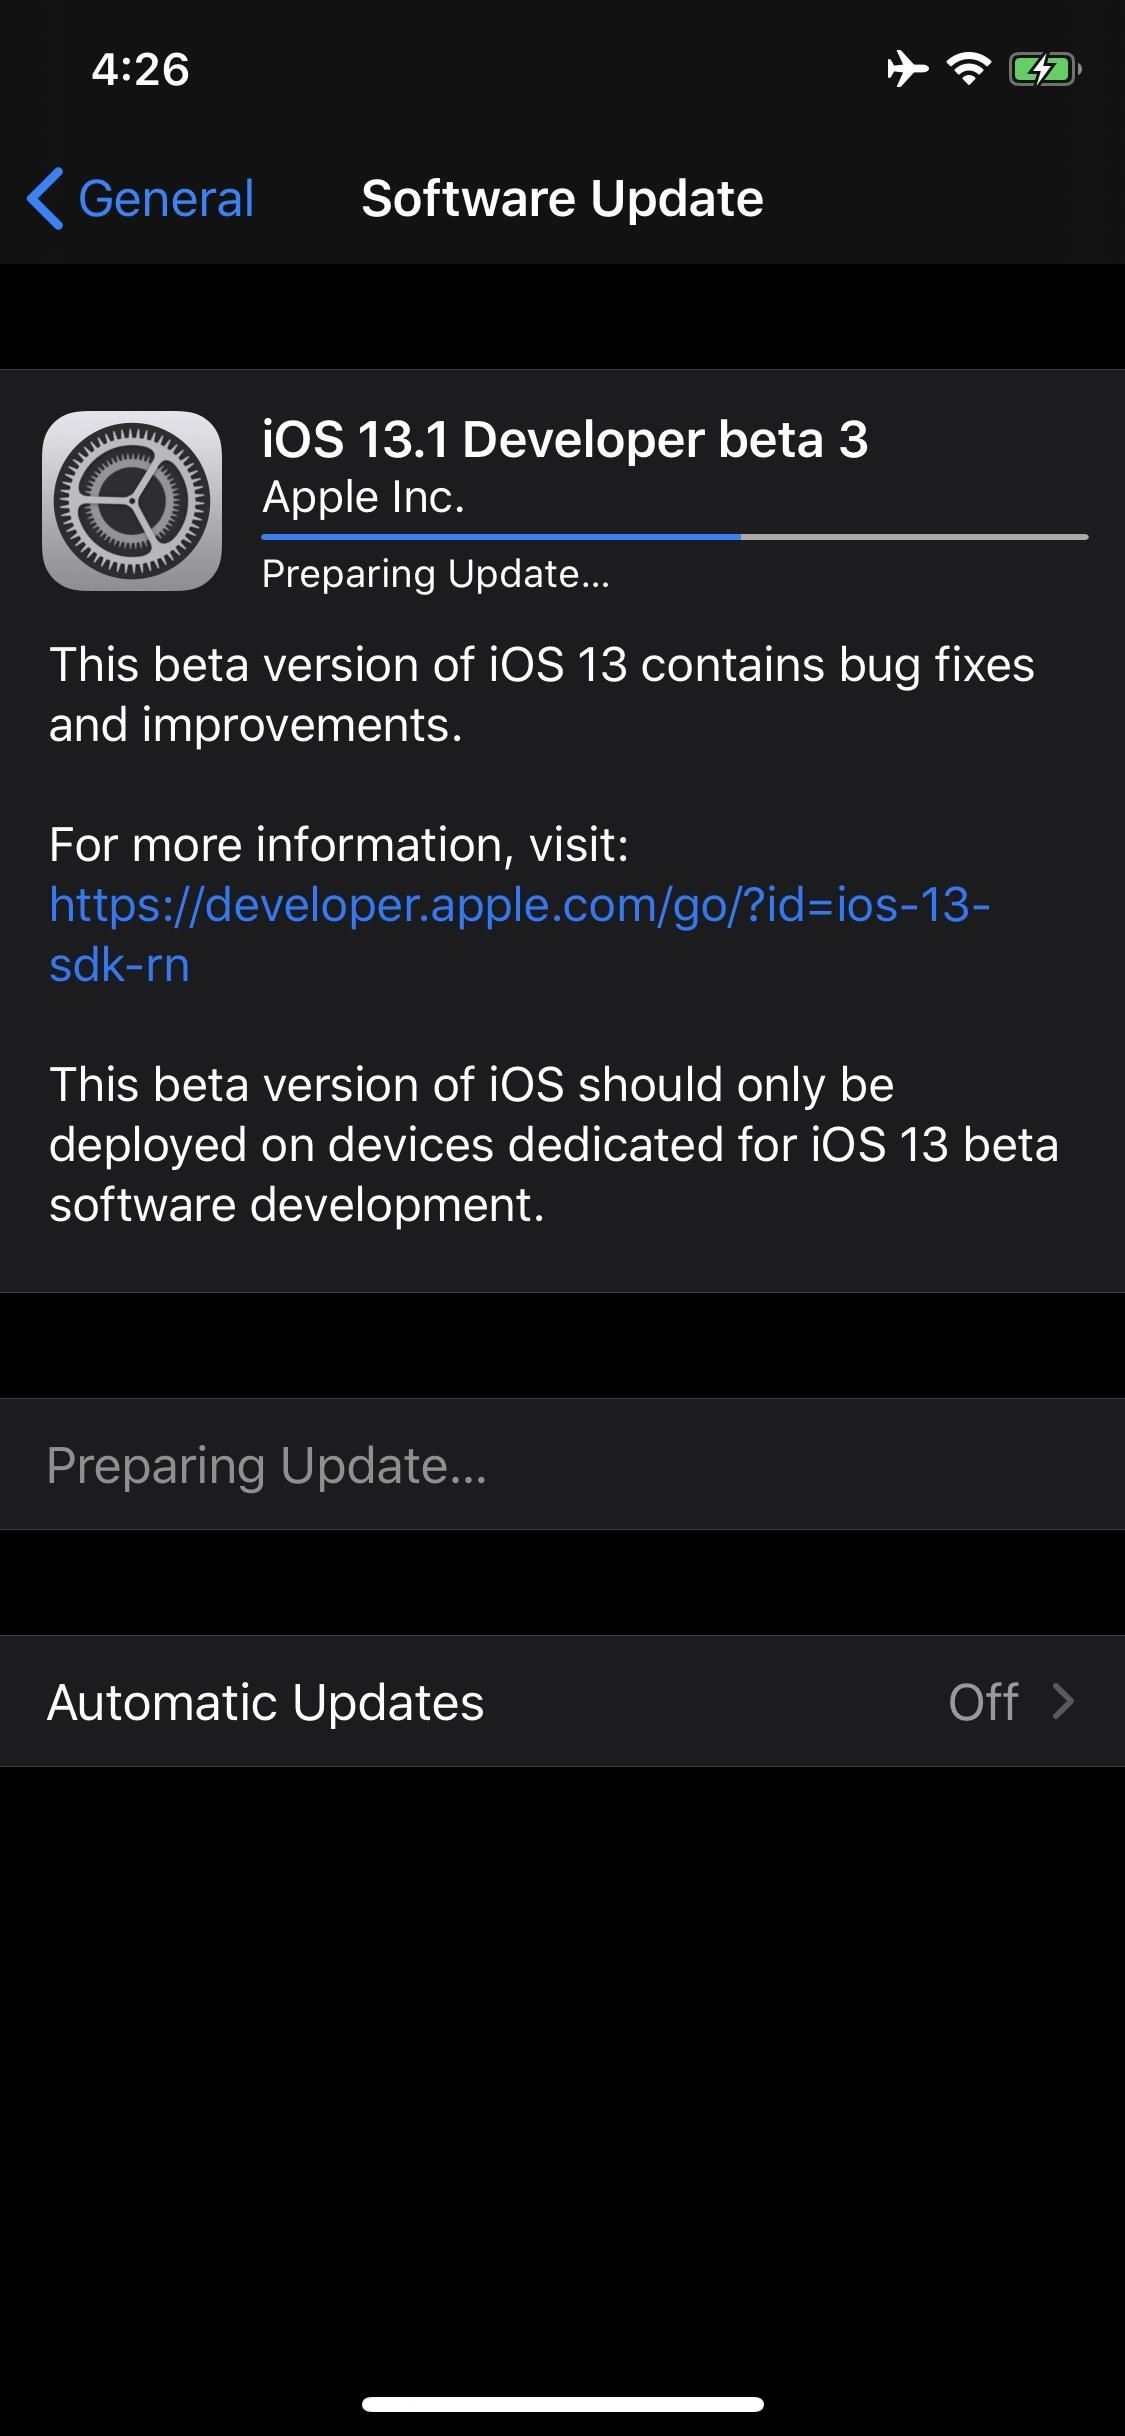 Apple Just Released iOS 13.1 Developer Beta 3 for iPhone